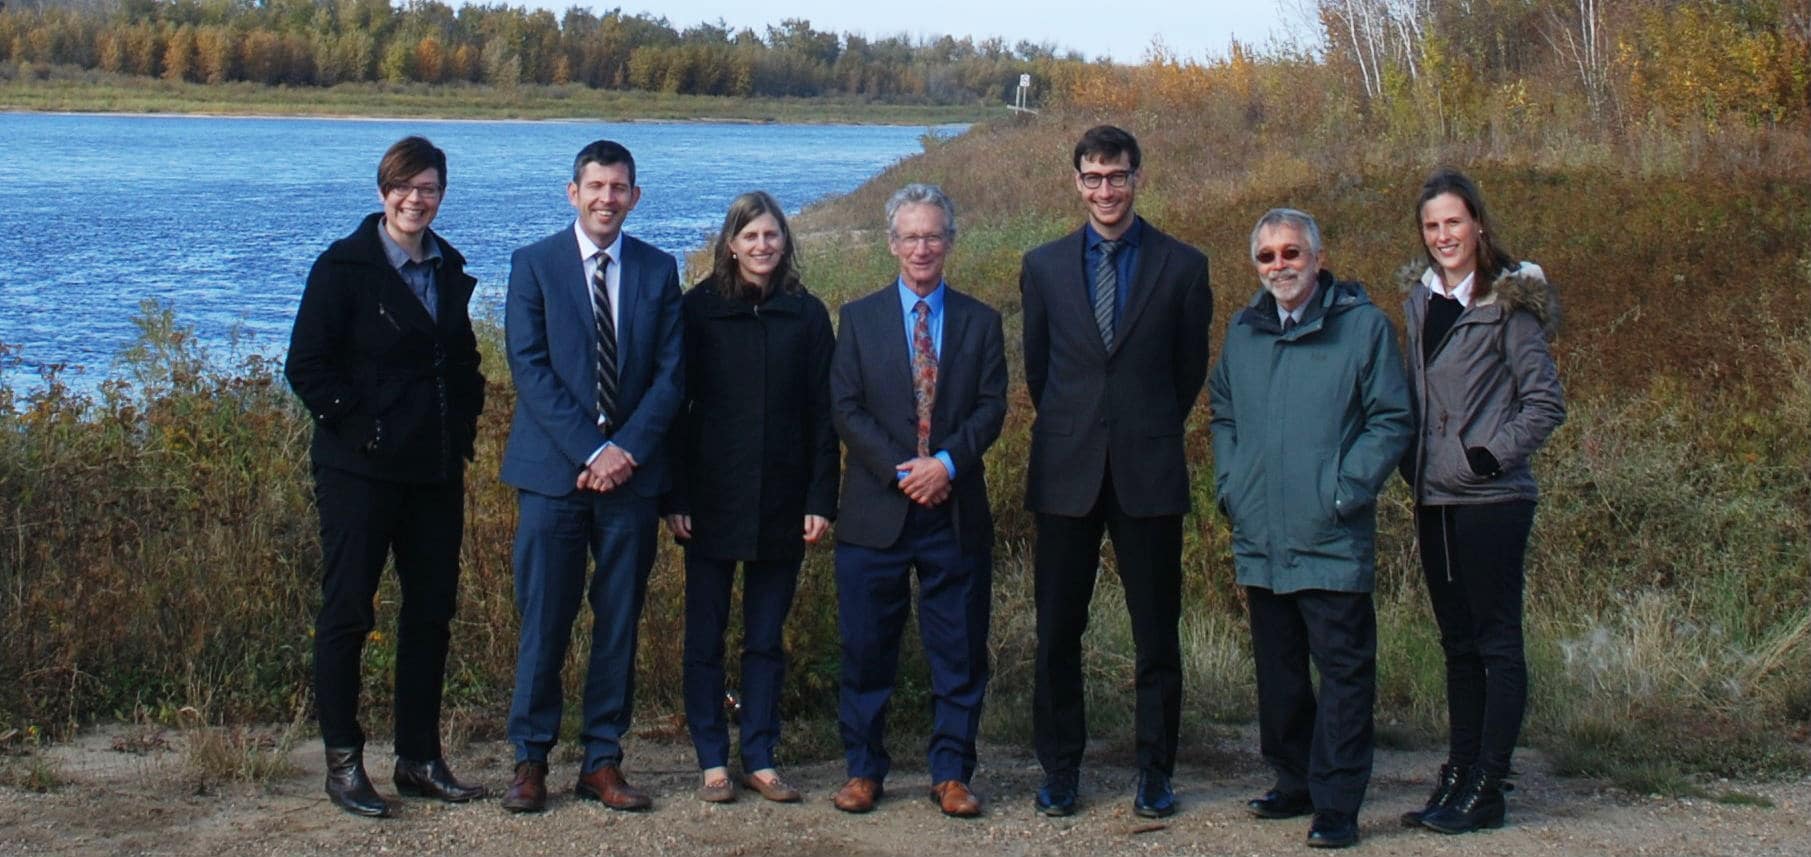 A group of lawyers stand outside in the grass near a small lake.